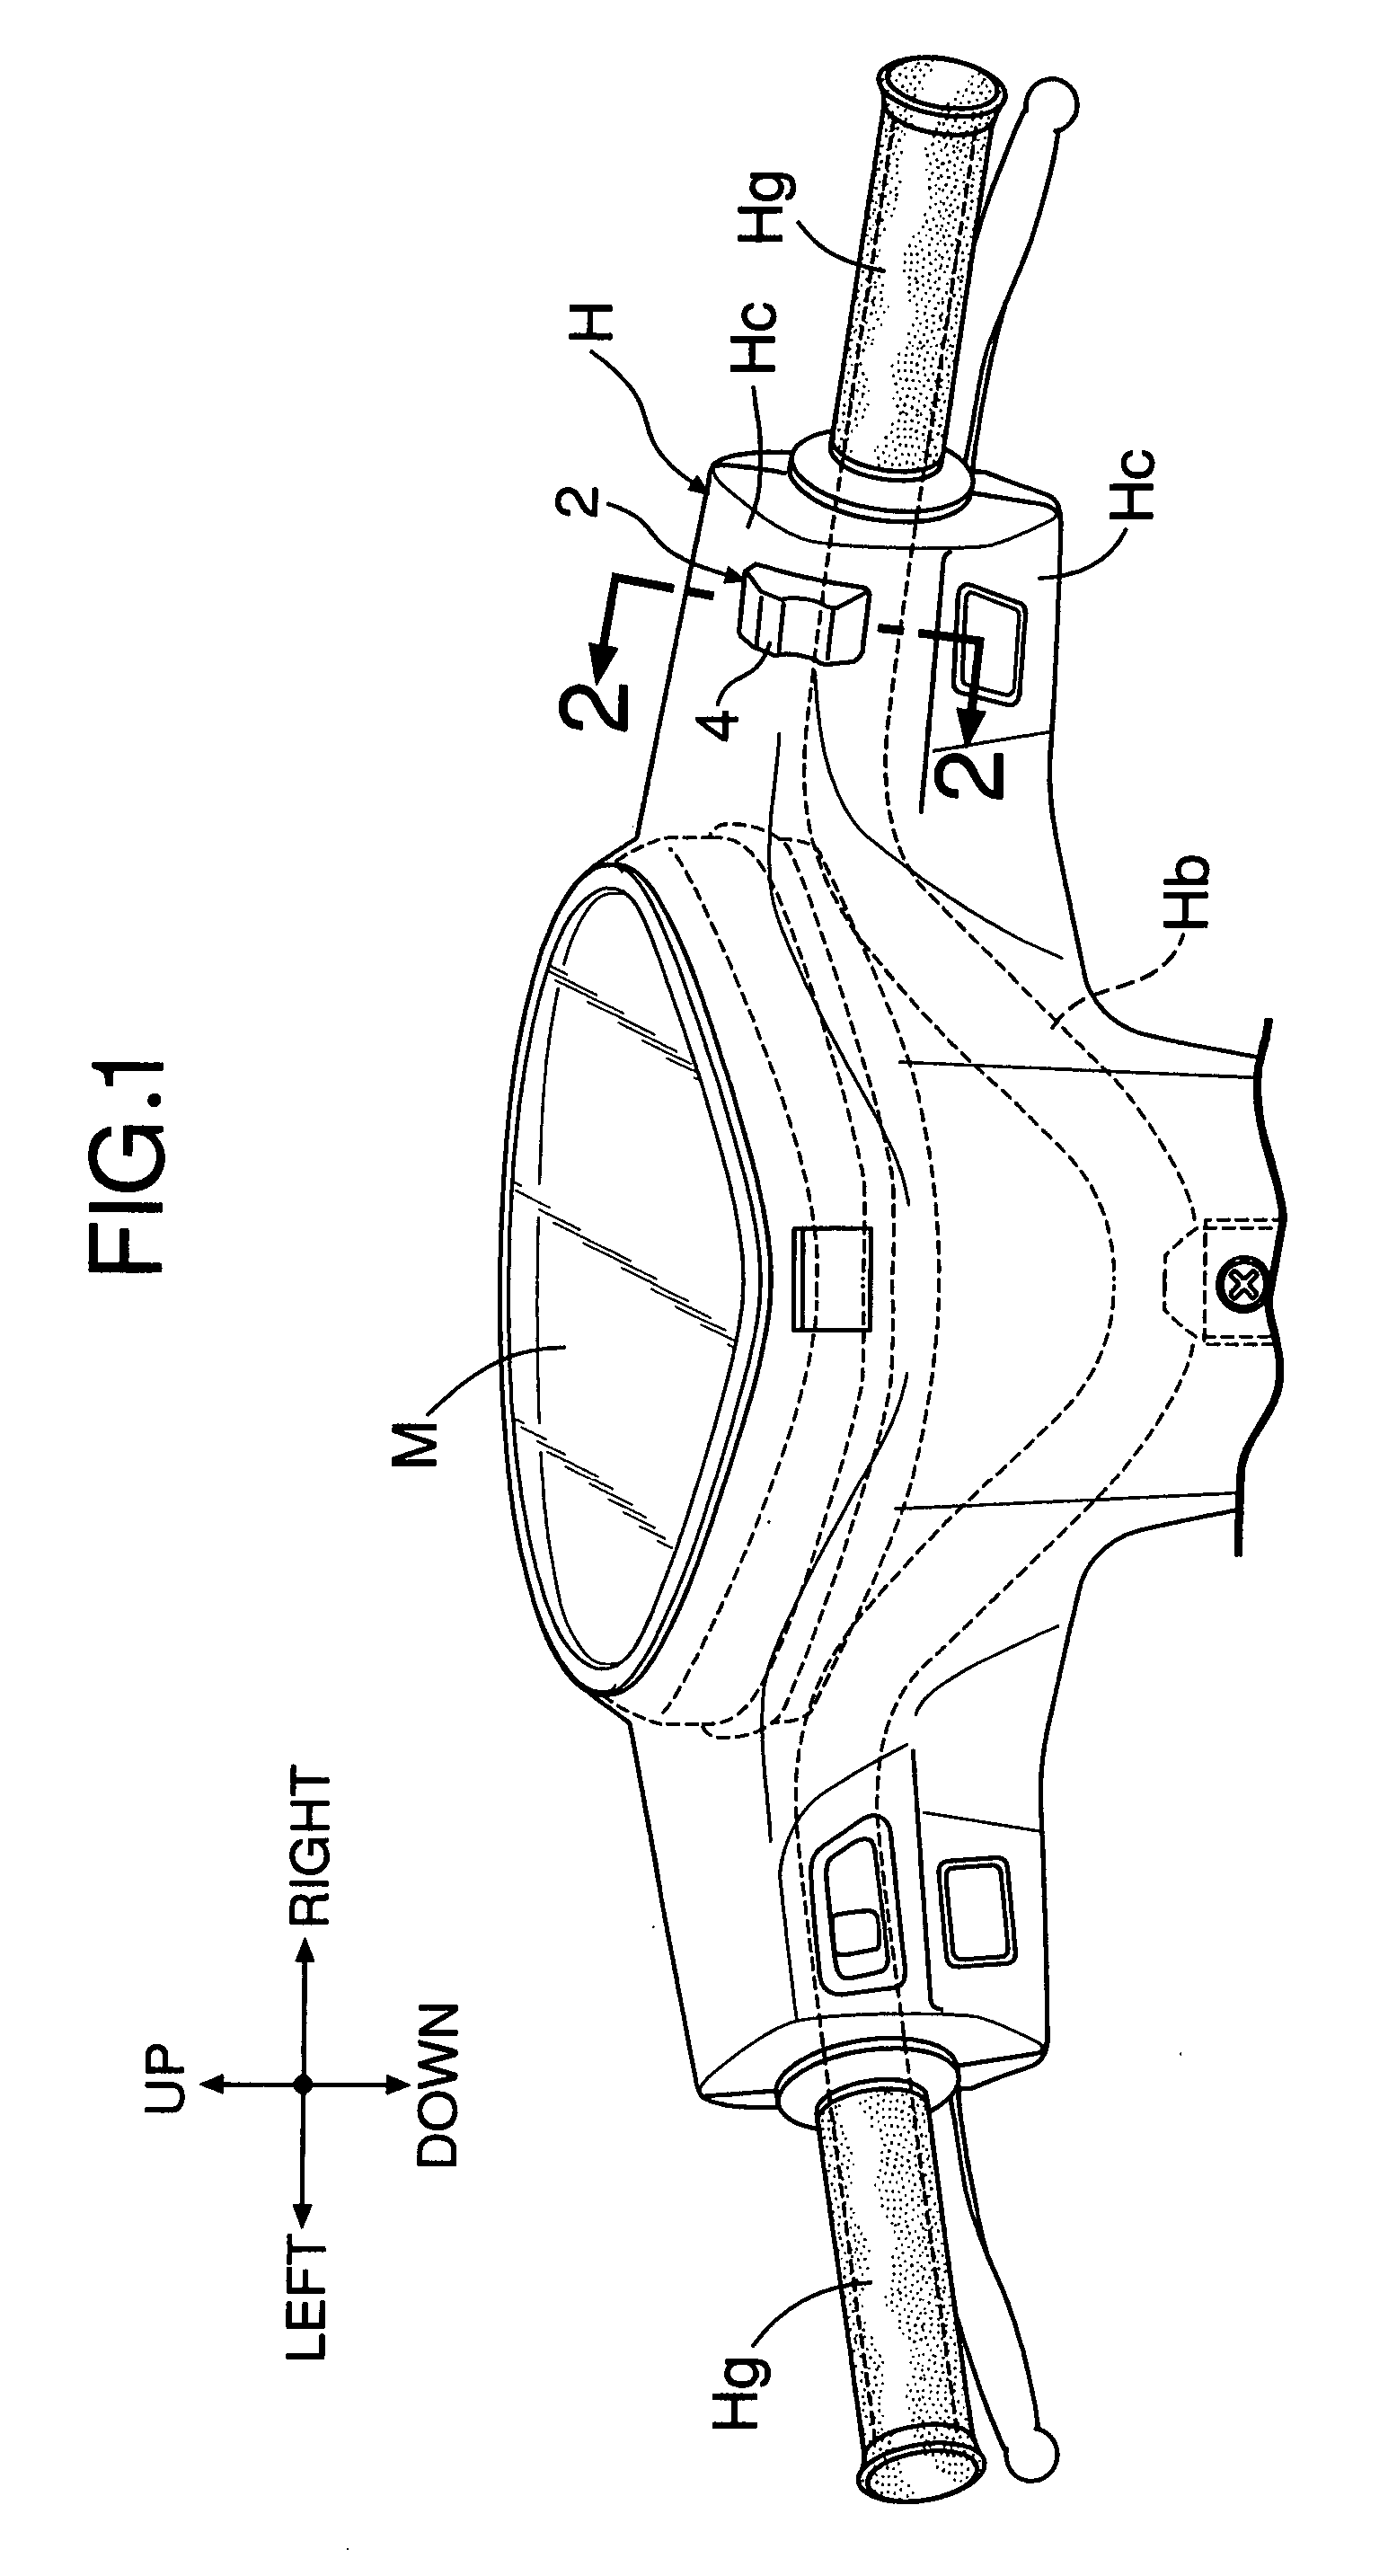 Switch device with rapid opening and closing between movable and stationary contacts